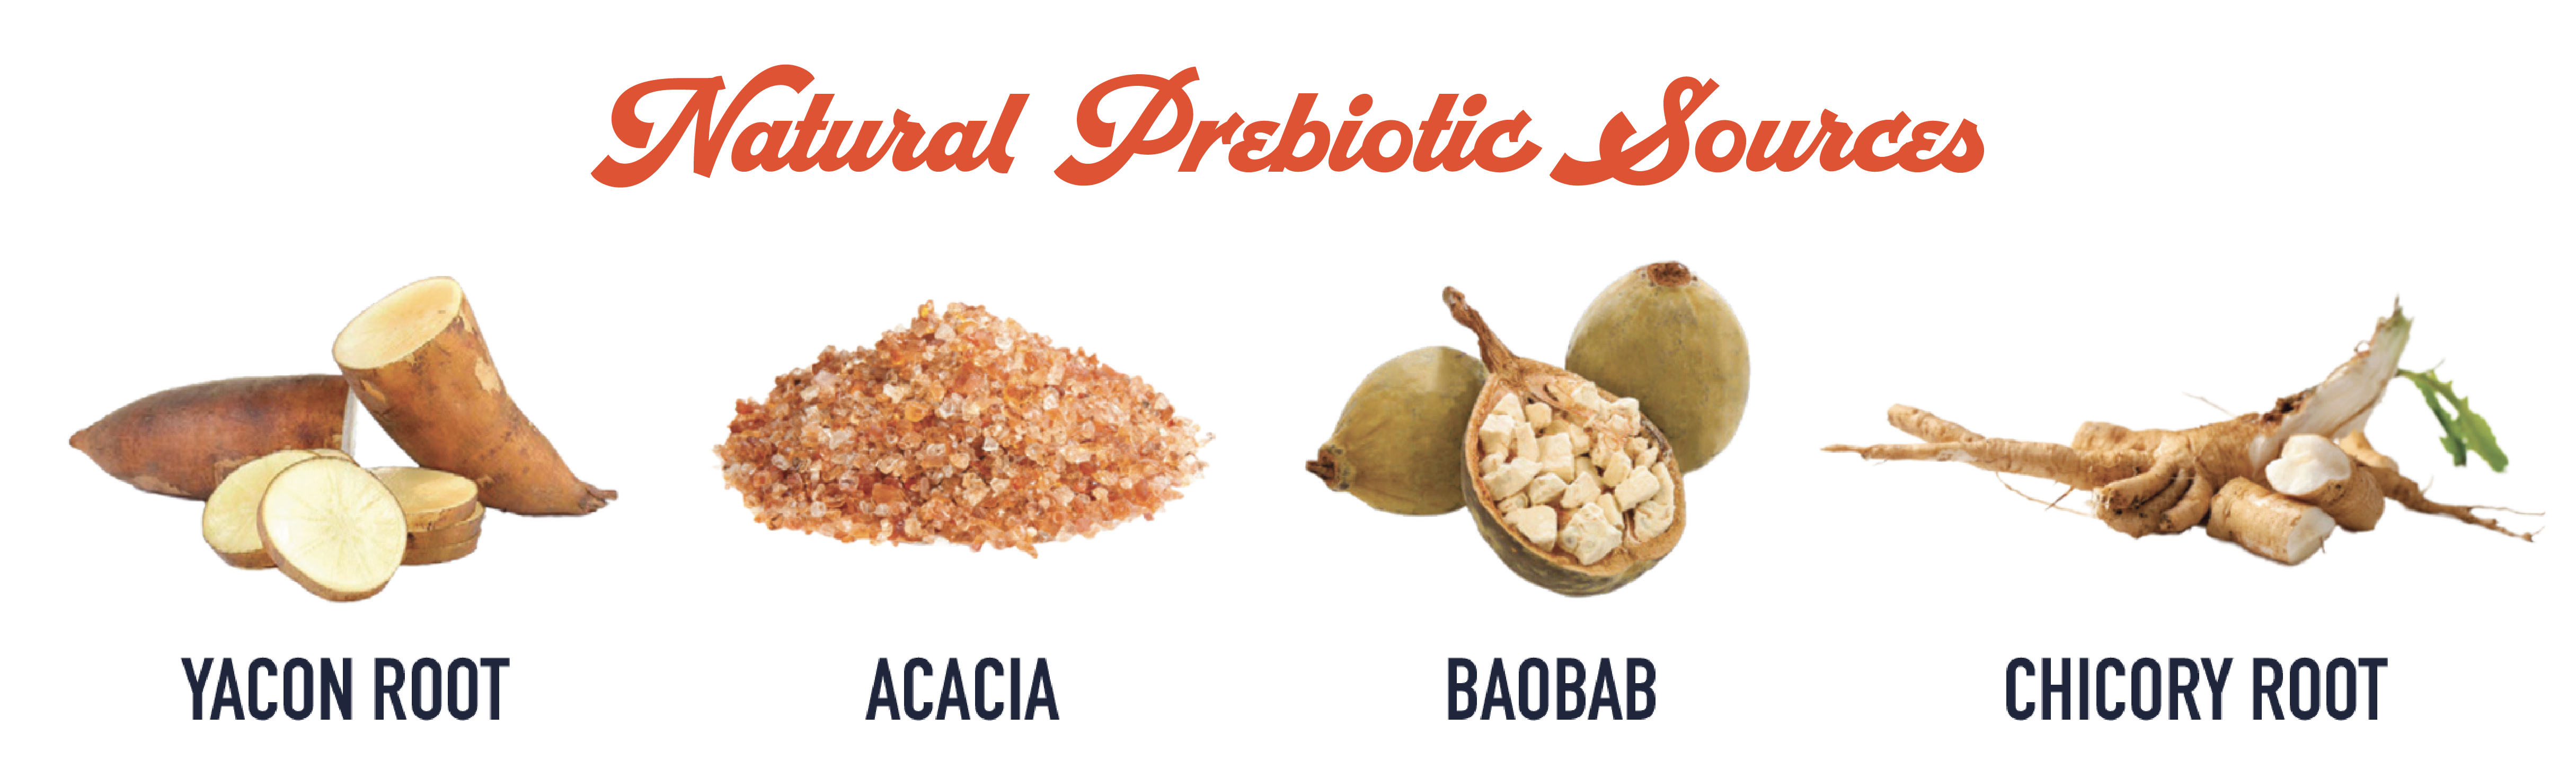 Natural sources of prebiotic fibres including Yacon Root, Chicory Root, Acacia Fibre (Sap from the Acacia Tree) and Baobab Fruit Pulp.